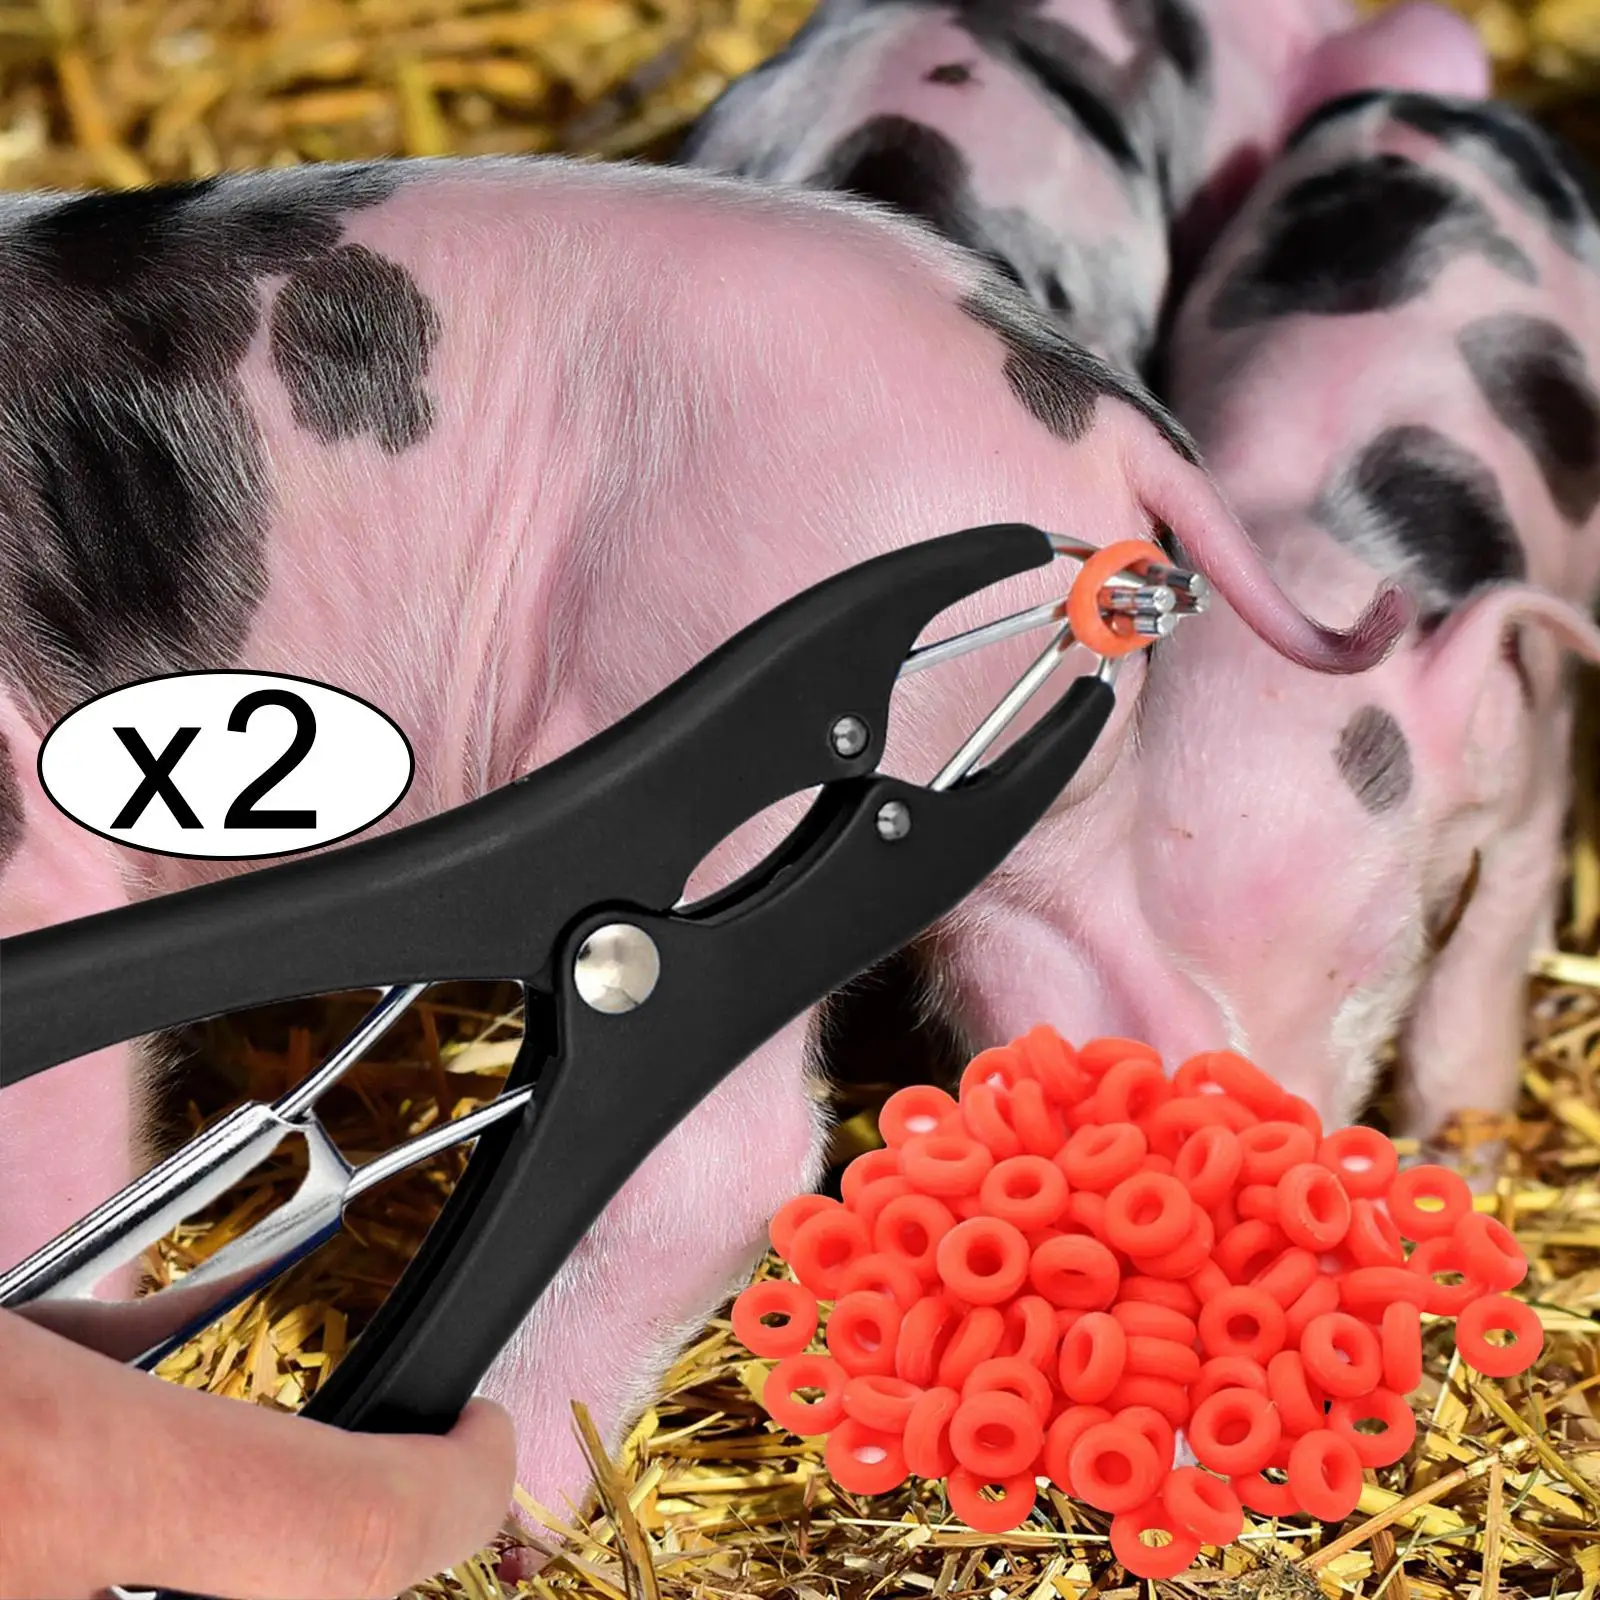 Castration Plier Animal Equipment Tool Accessories Castration Banding Tail Pig Tail Cutting Clamp for Goat Pig Piglets Sheep